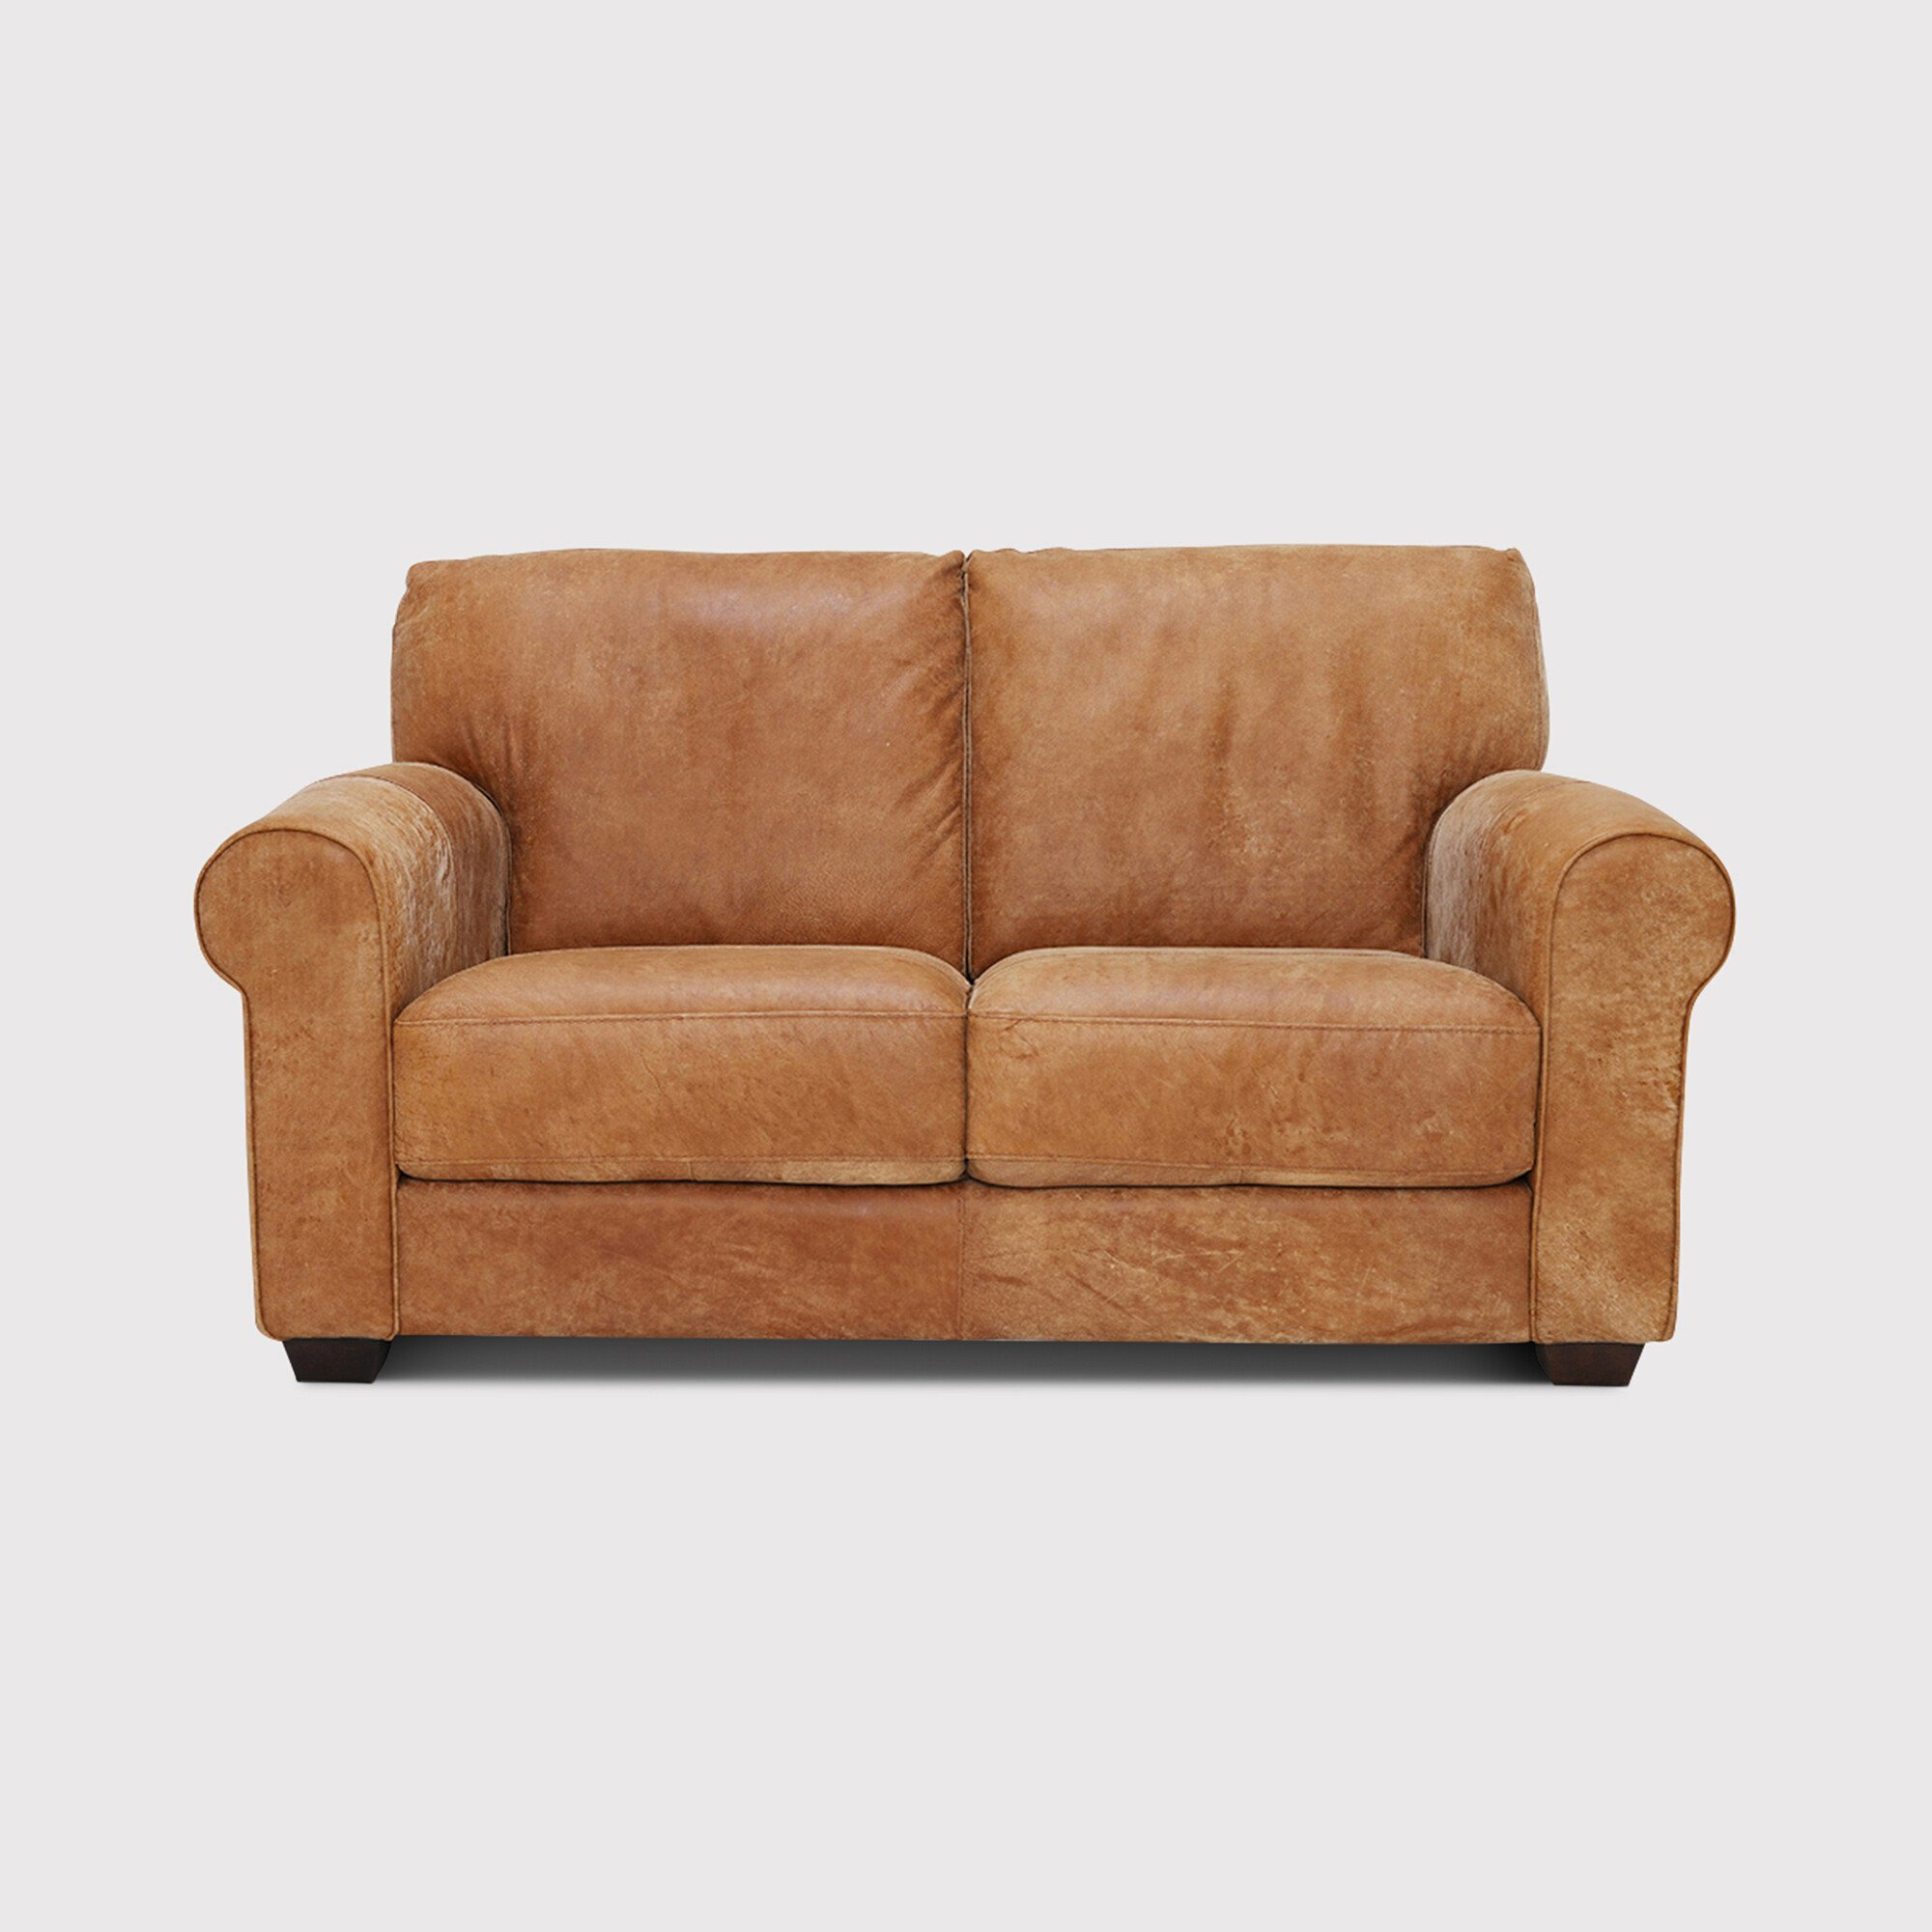 Houston Love Seat Sofa, Brown Leather - Barker & Stonehouse - image 1